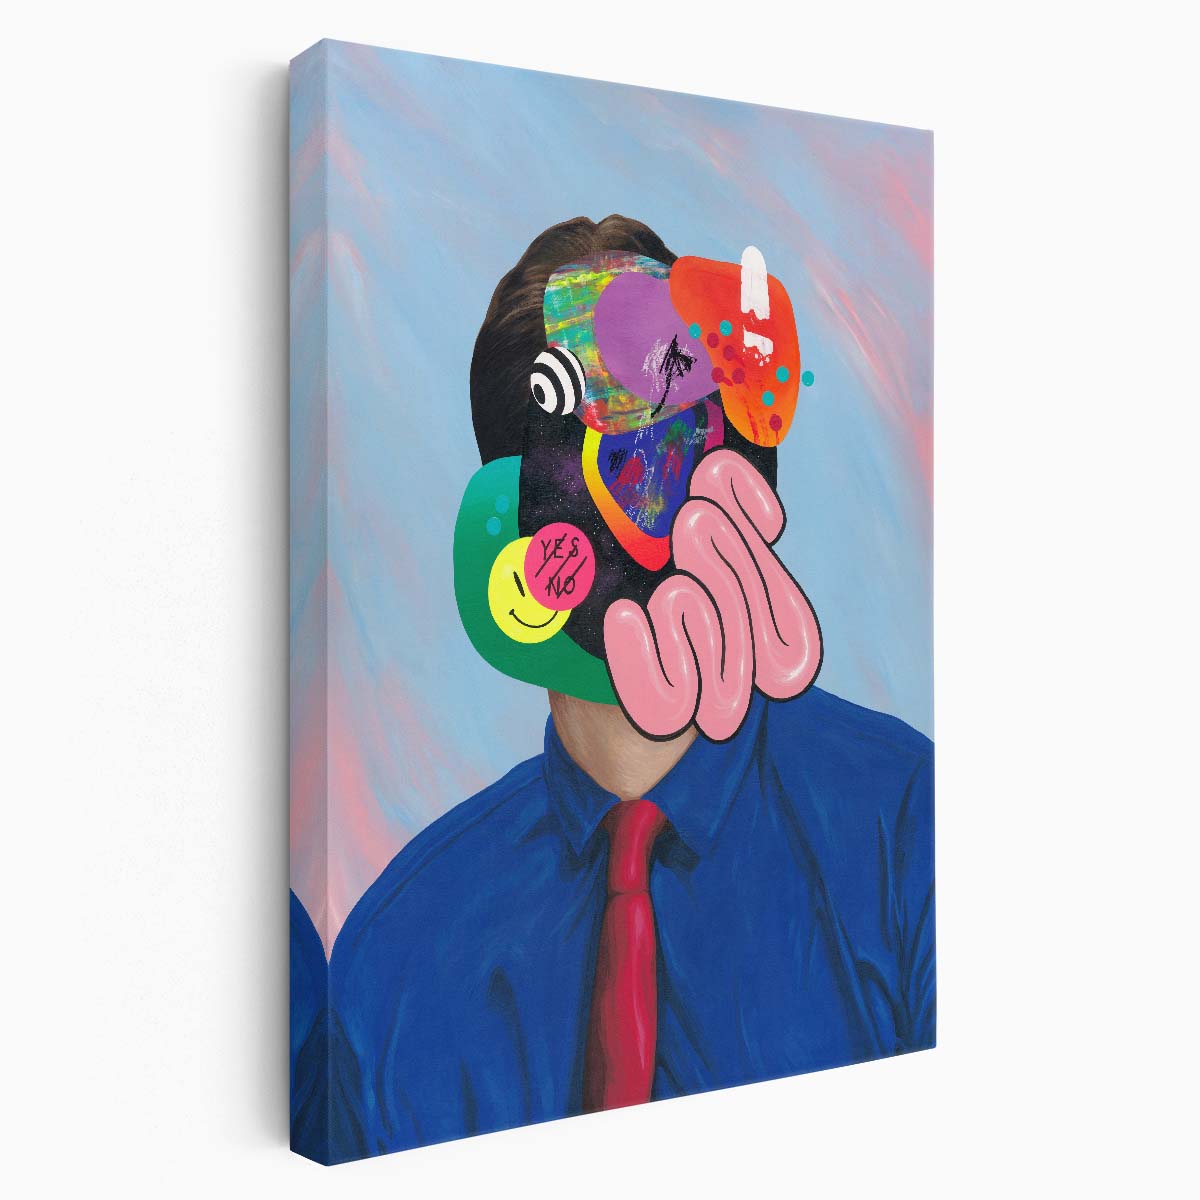 Colorful Surrealist Man Illustration - Pop Art Sky Composite by Luxuriance Designs, made in USA